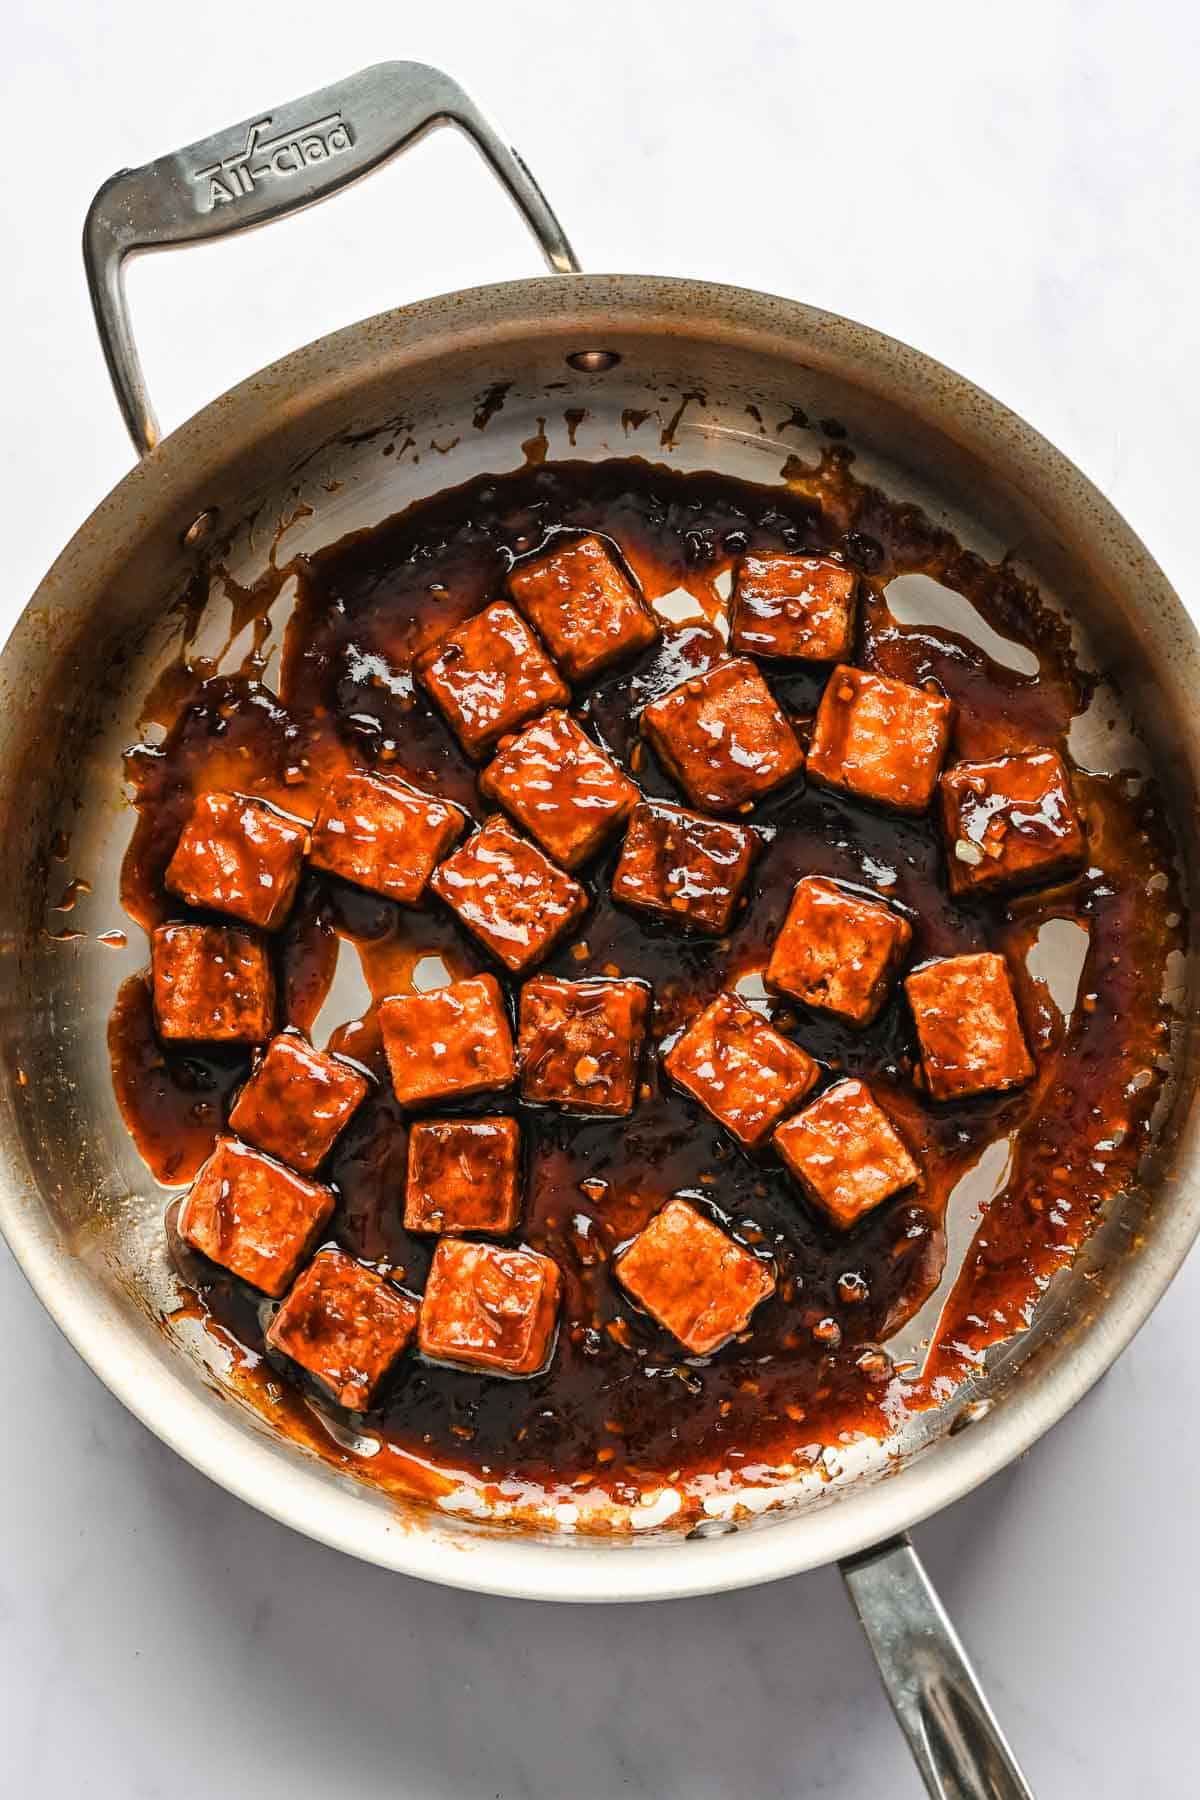 Fried tofu combined with sesame garlic sauce in a metal skillet.